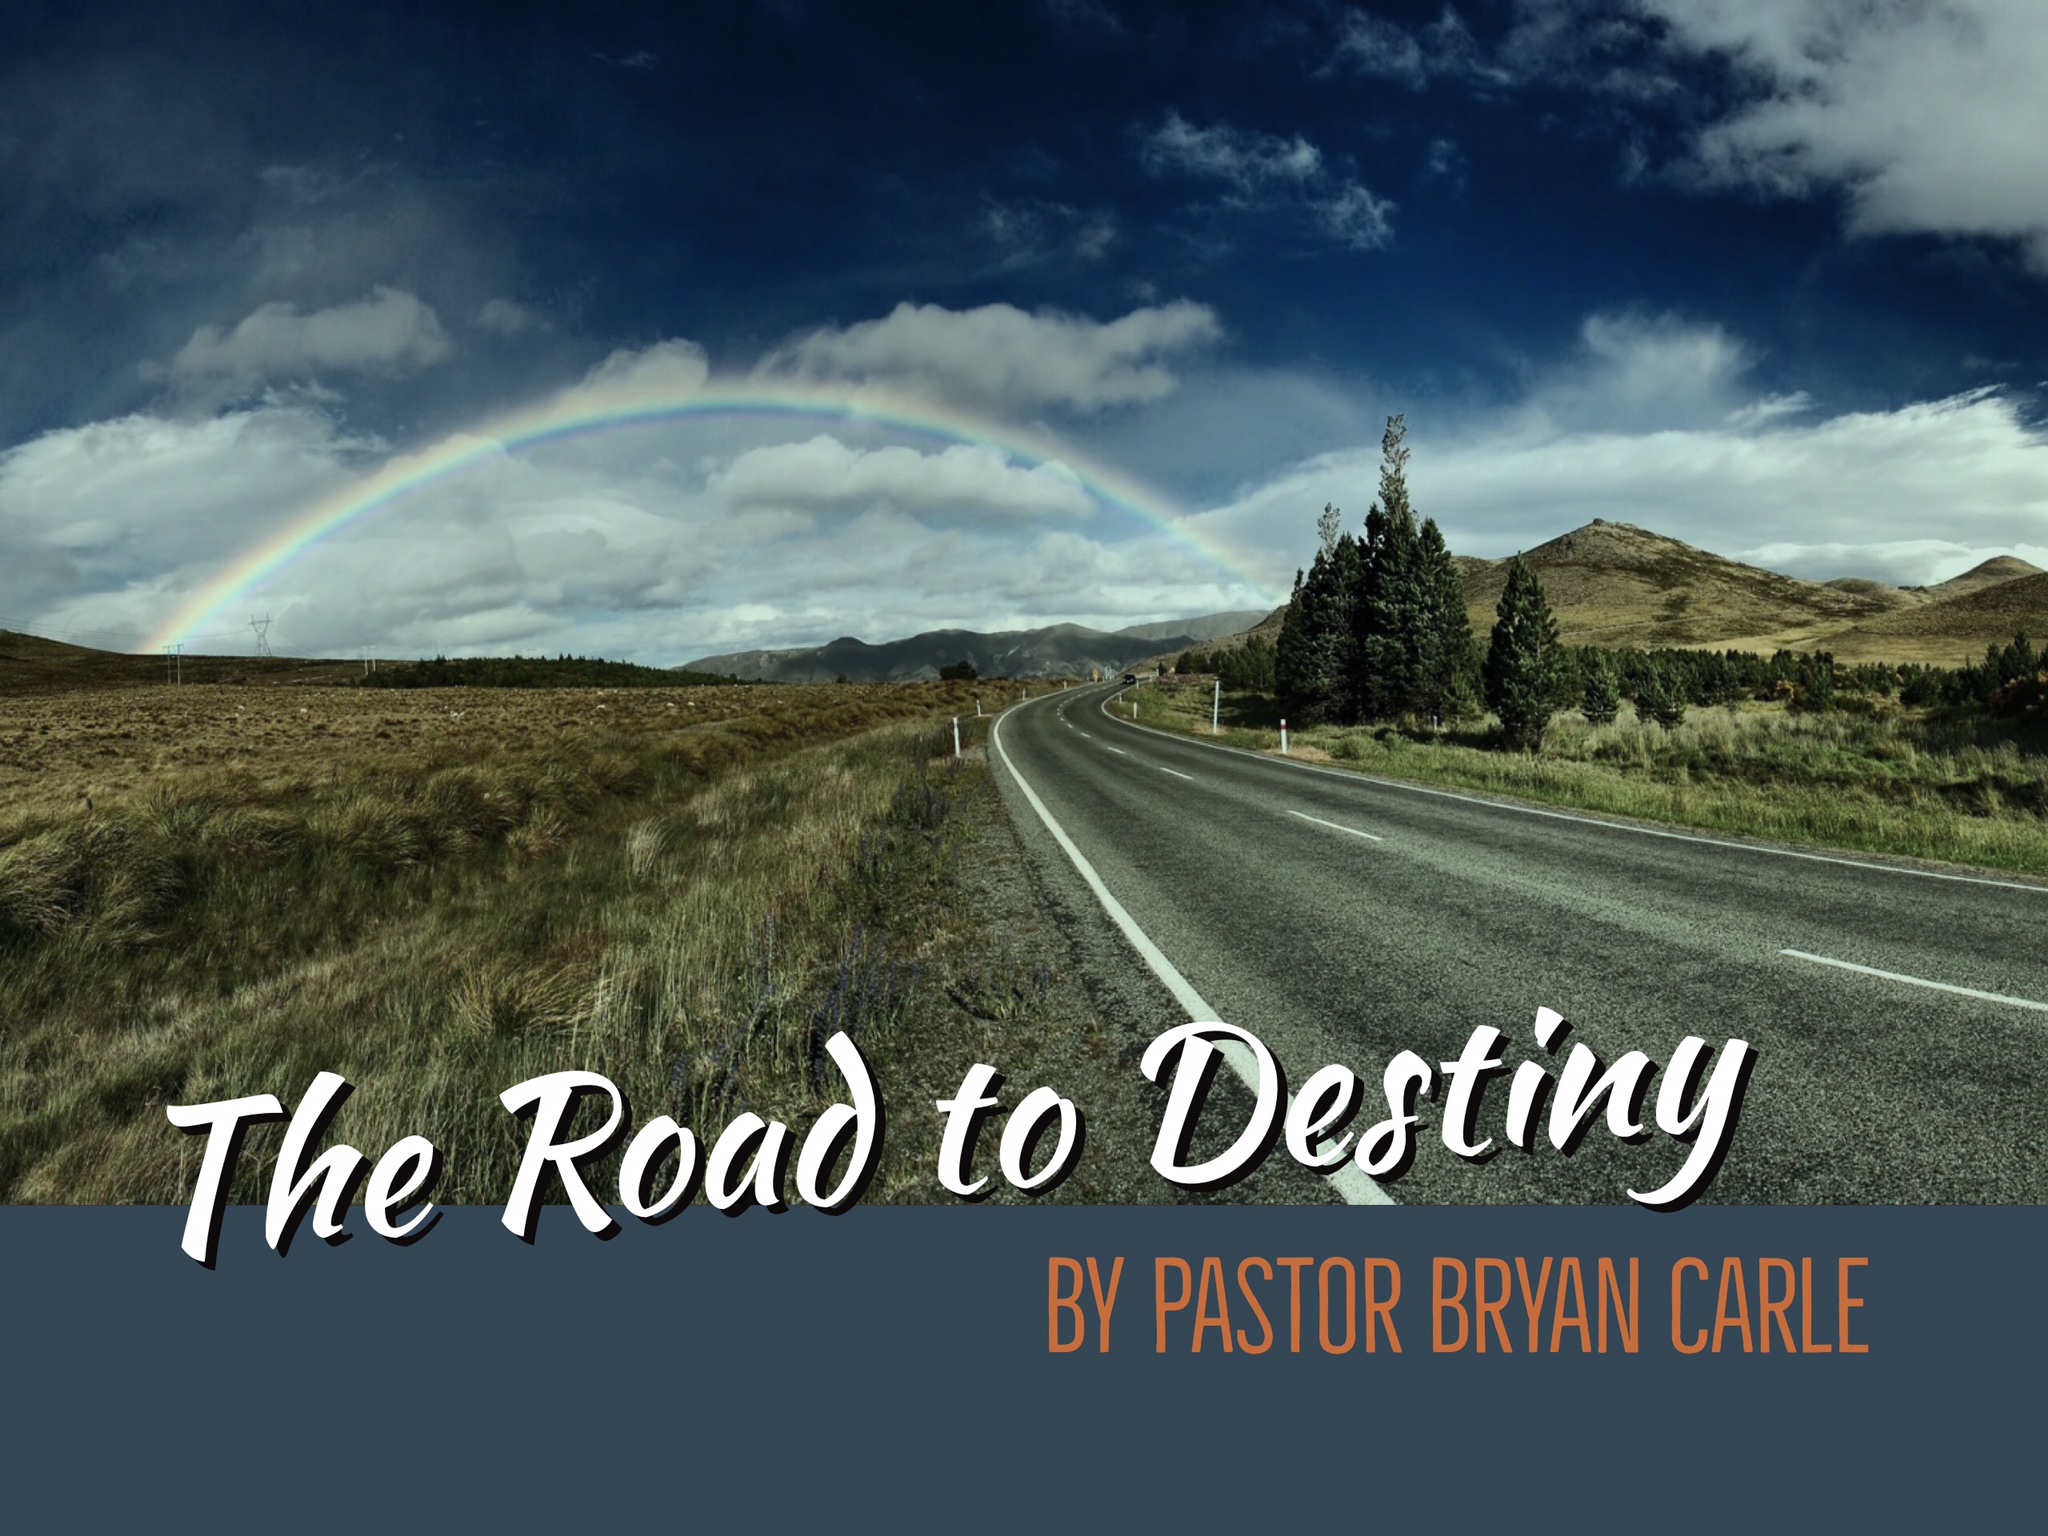 The Road to Destiny by Pastor Bryan Carle